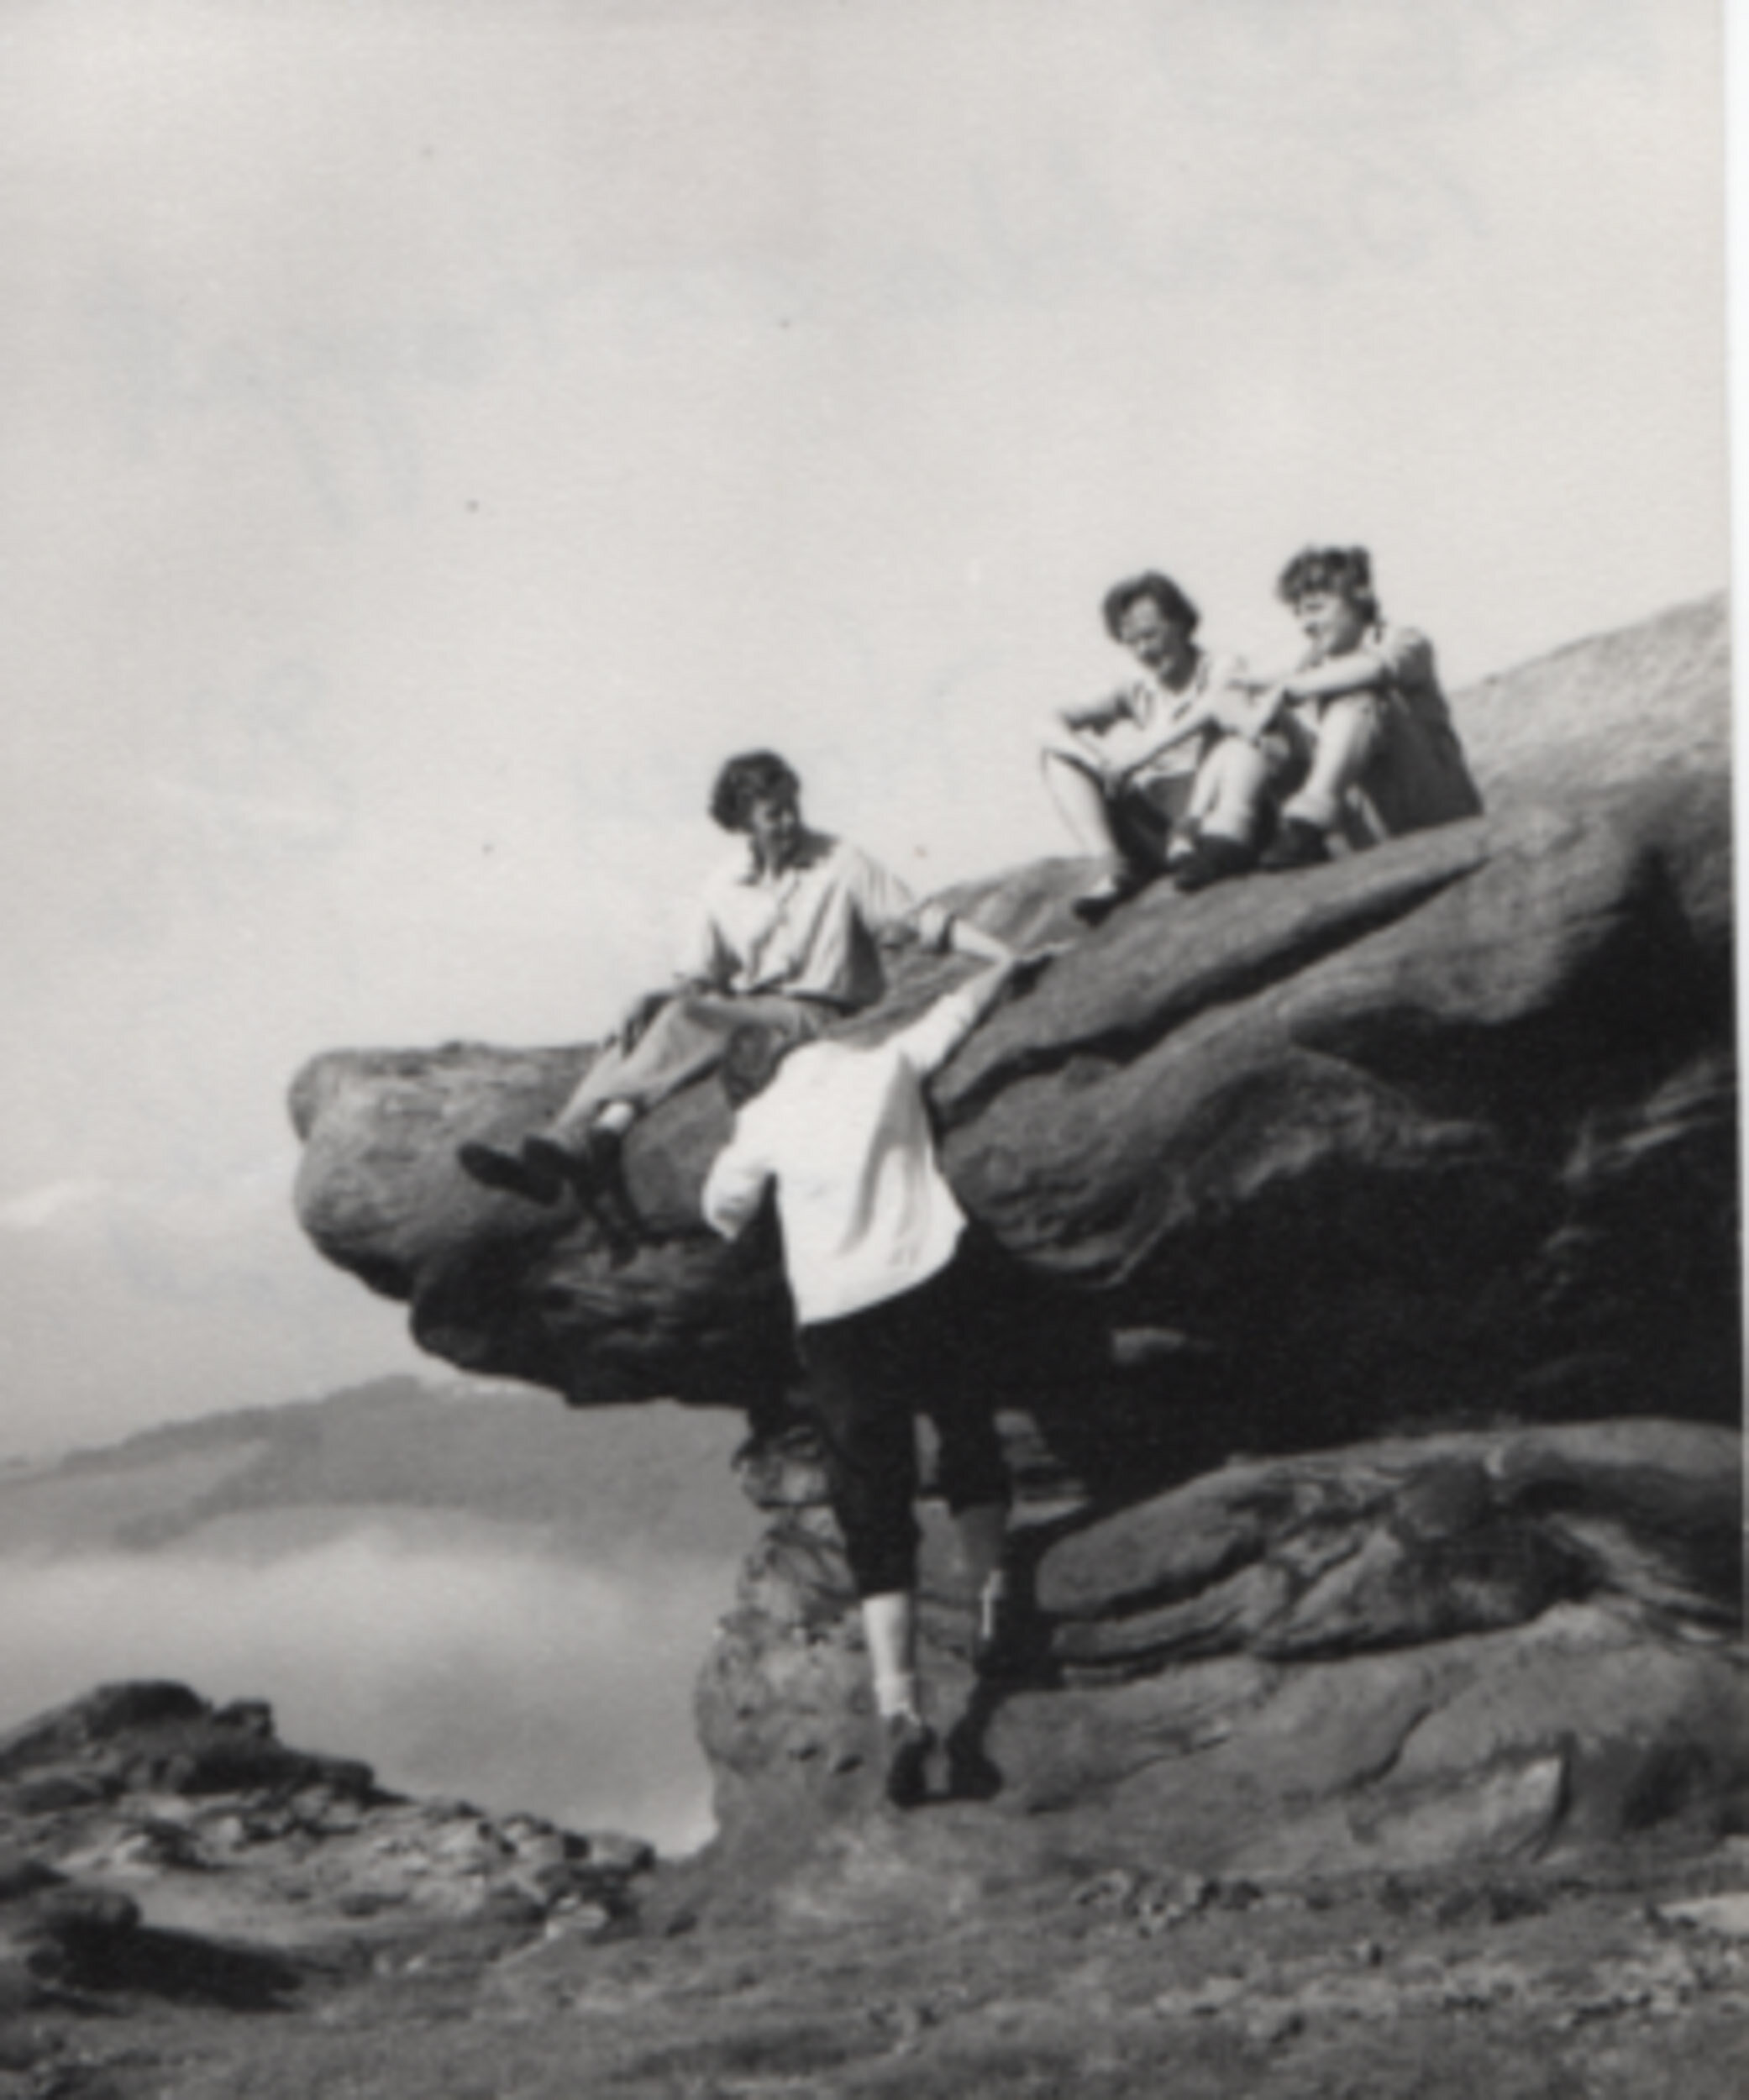 Alwine Walford climbs while Nea Morin, Nancy Smith and Mary Fulford look on. Froggatt, Peak District, 1962